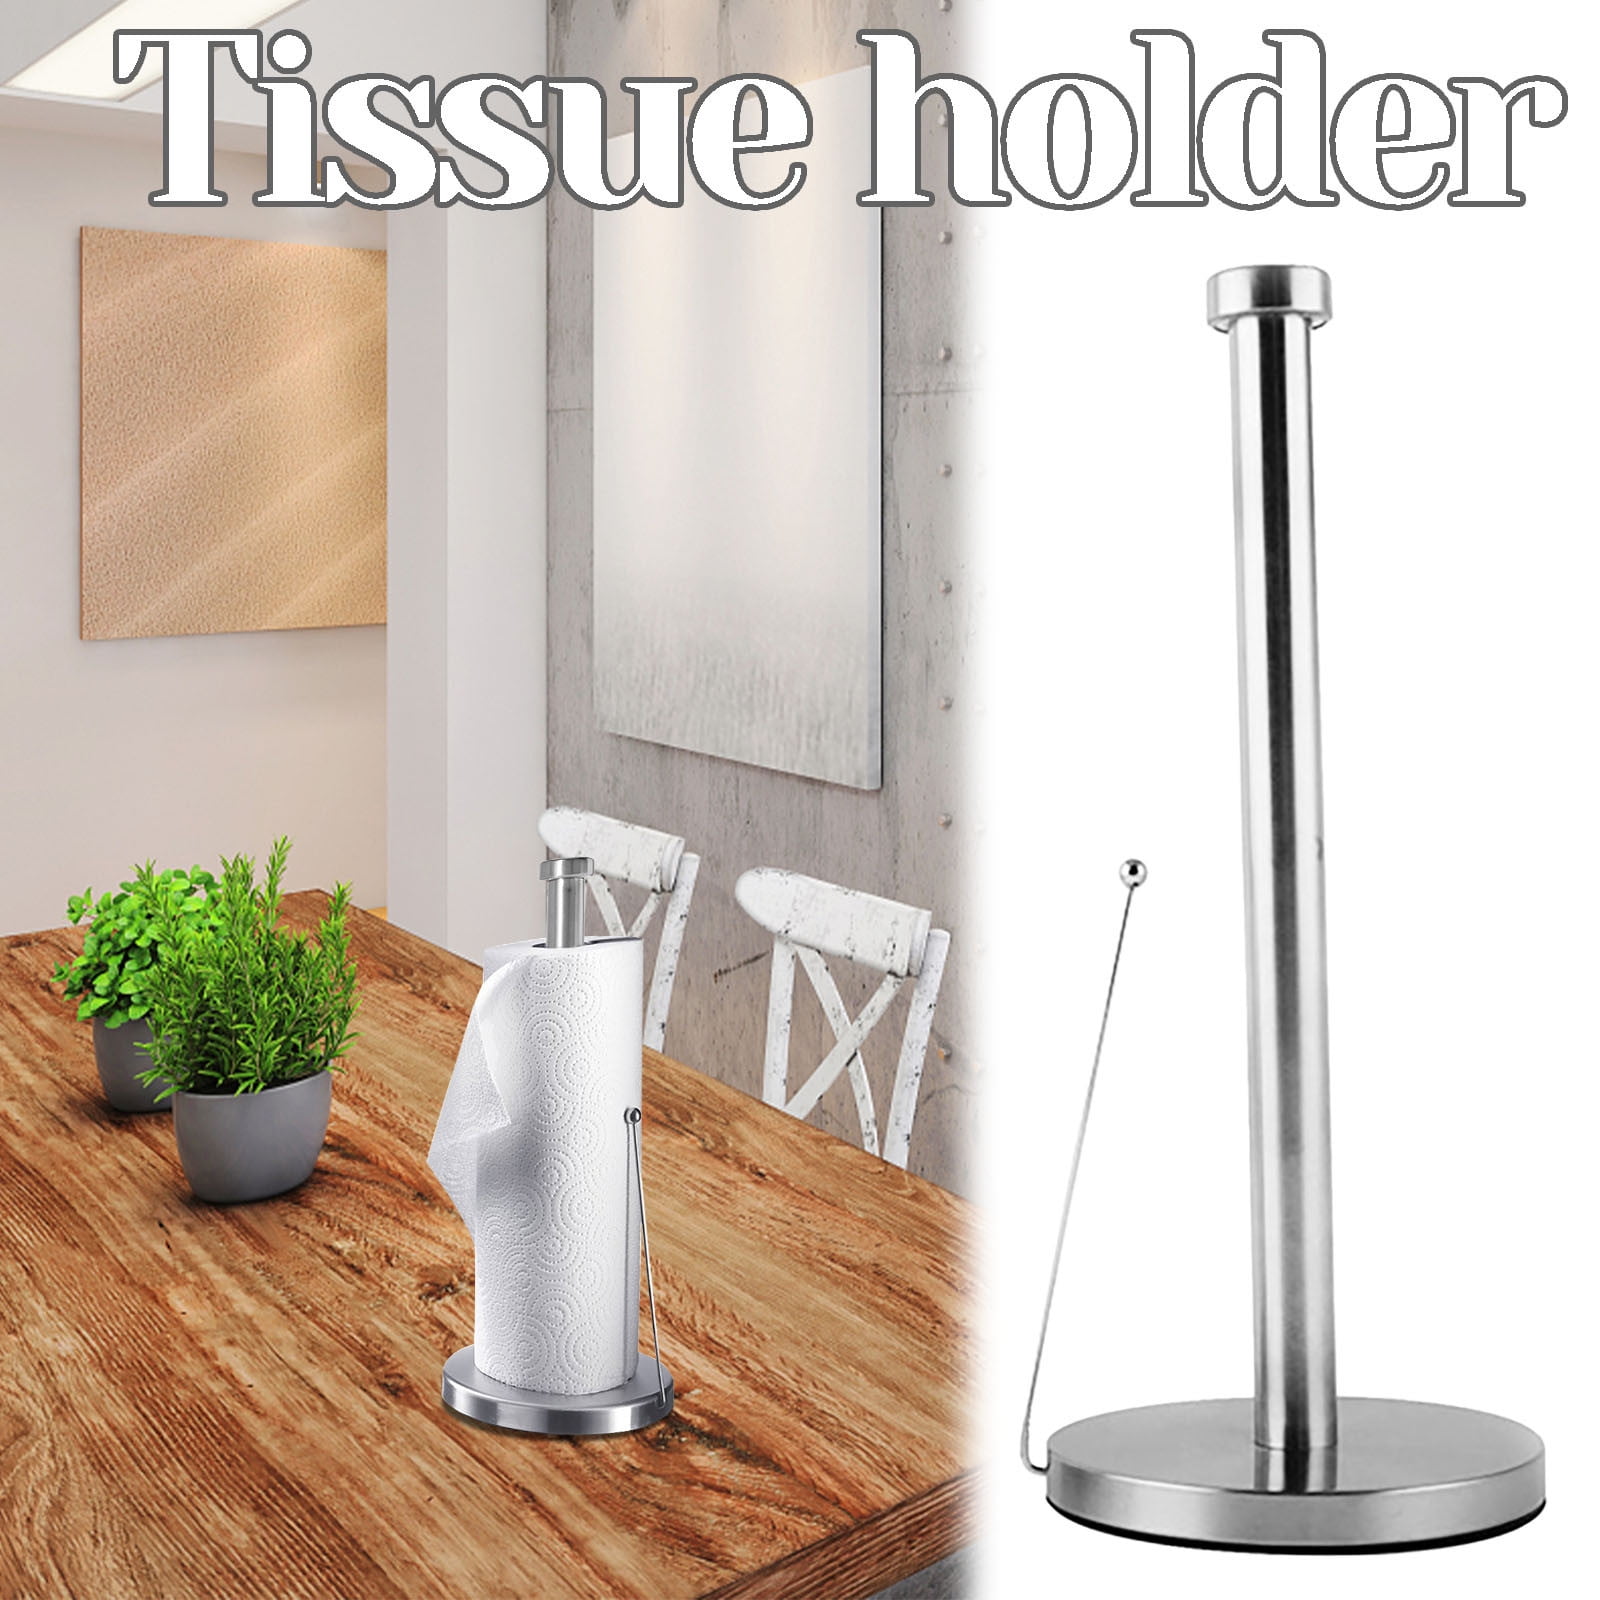  Paper Towel Holder Countertop, Vertical Paper Towel Roll Holder  for Kitchen and Bathroom, with Suction Cup, Adjustable Damping Function,  Easy to Operate with One Hand (Black)